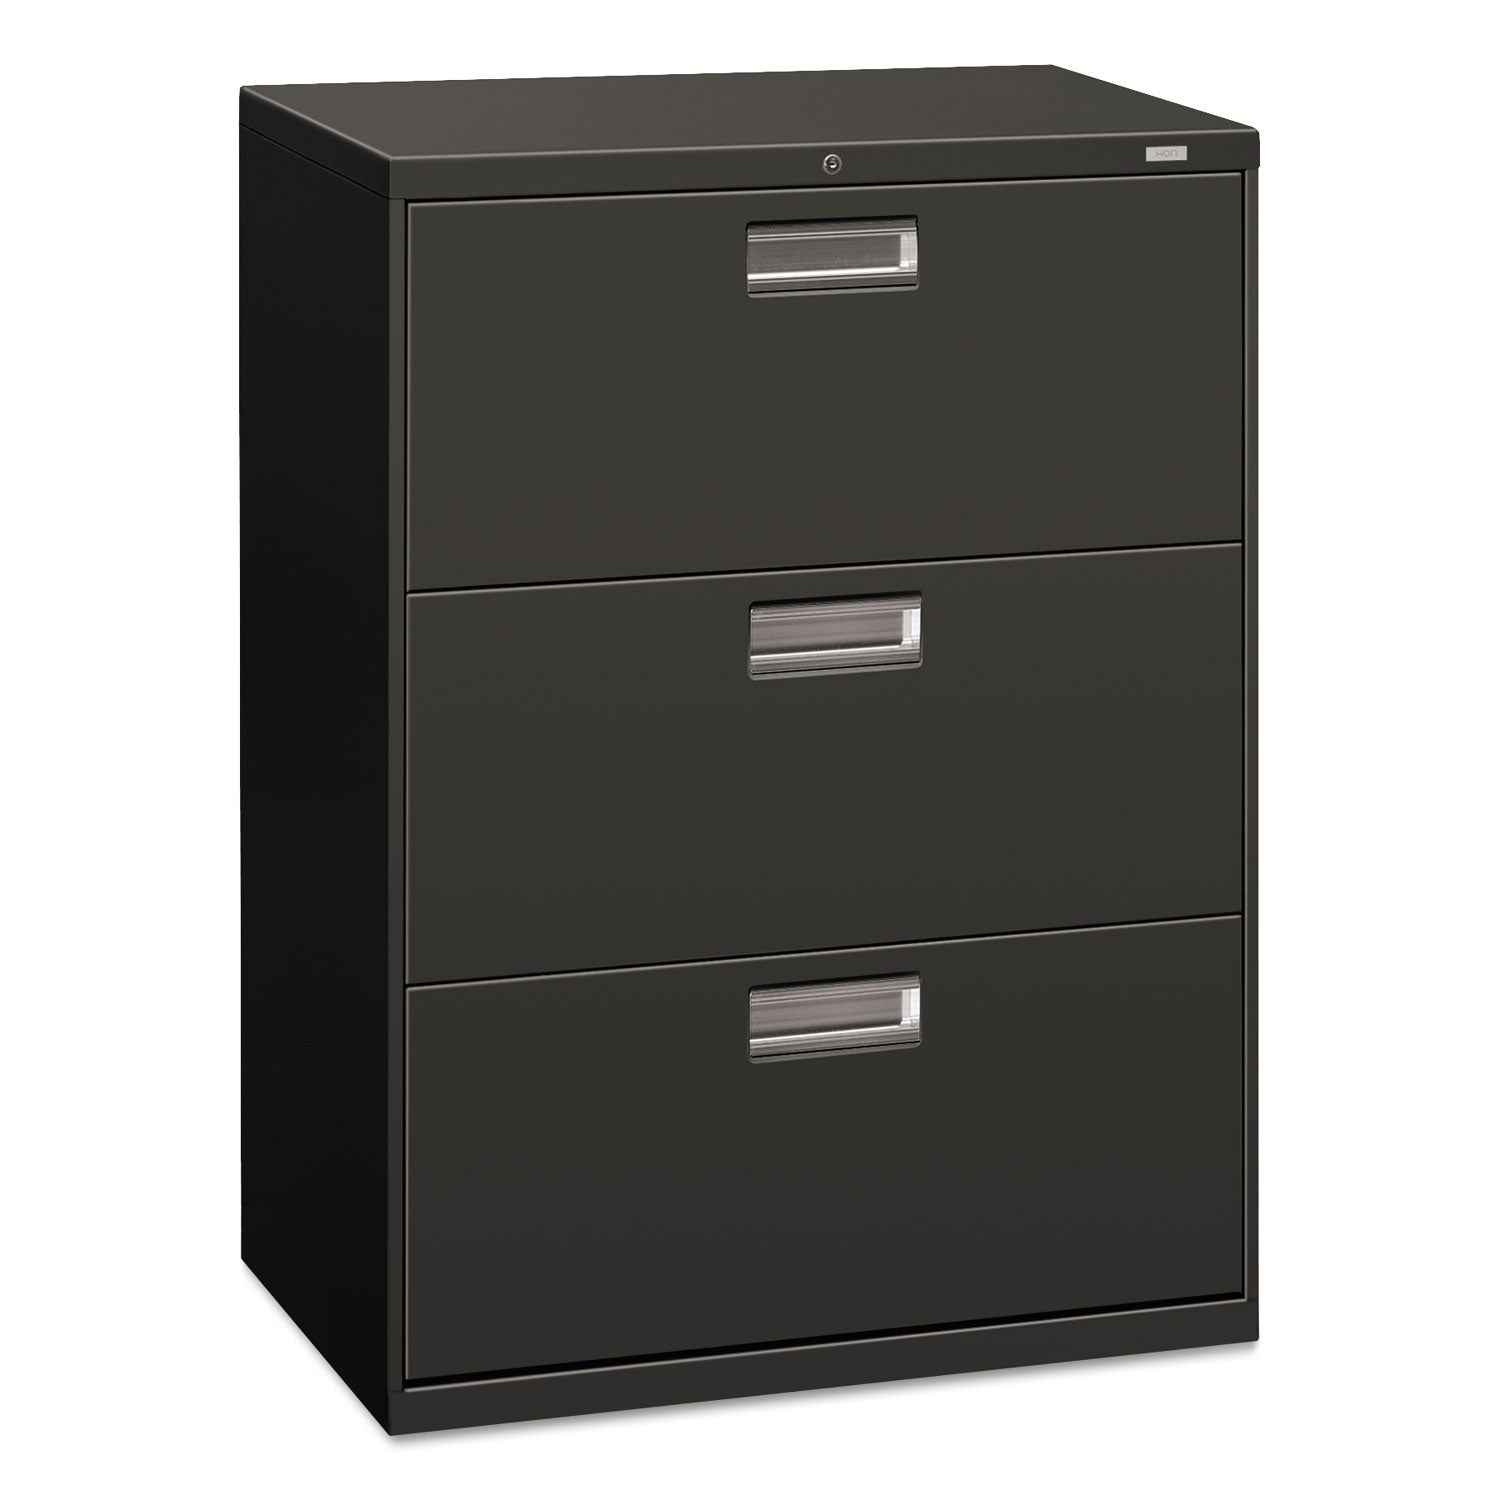 Brigade 600 Series Lateral File, 3 Legal/Letter-Size File Drawers, Charcoal, 30" x 18" x 39.13 - 